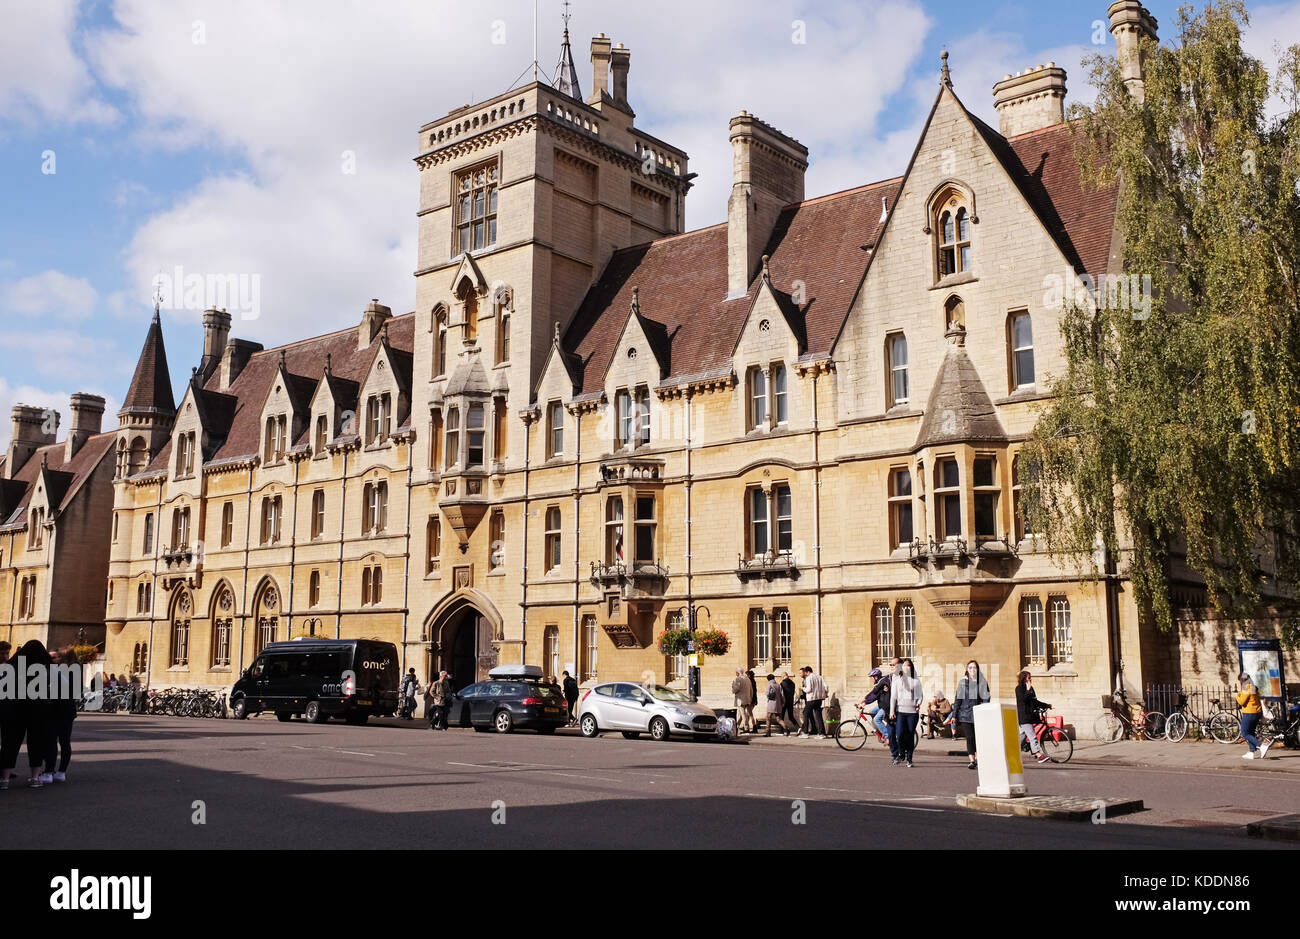 Oxford Oxfordshire UK - Balliol College, founded in 1263, is one of the constituent colleges of the University of Oxford in England  Photograph taken  Stock Photo